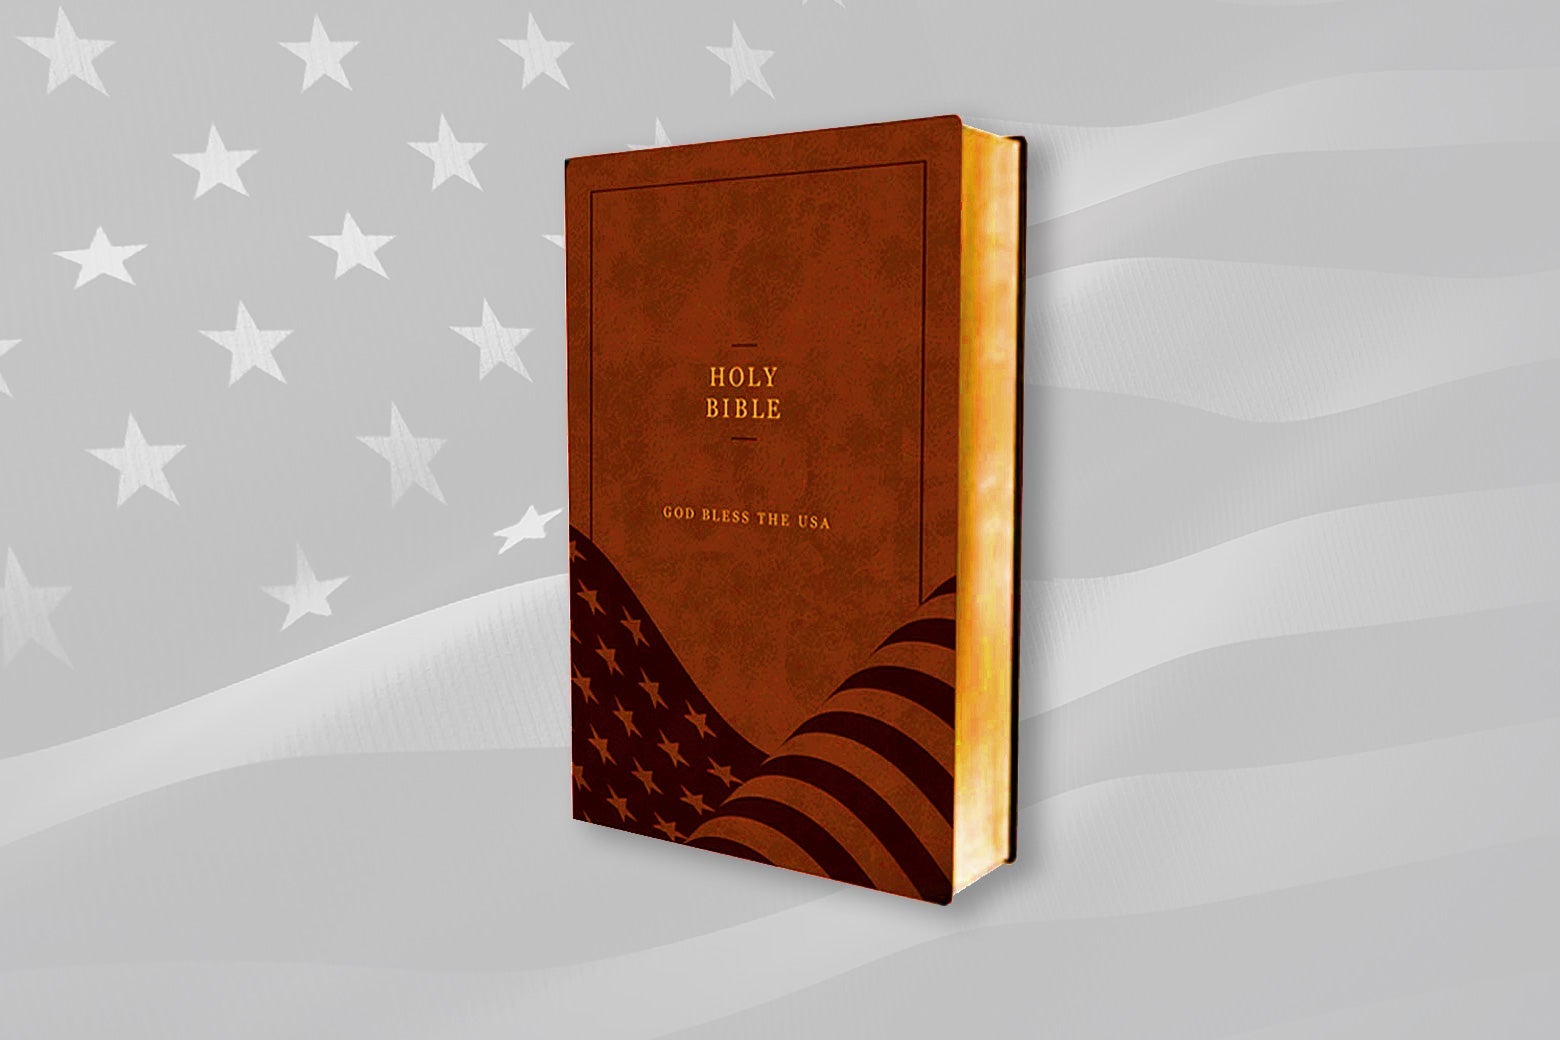 A bible with a brown cover featuring the words "God Bless the USA" and an American flag, floating over an American flag backdrop.